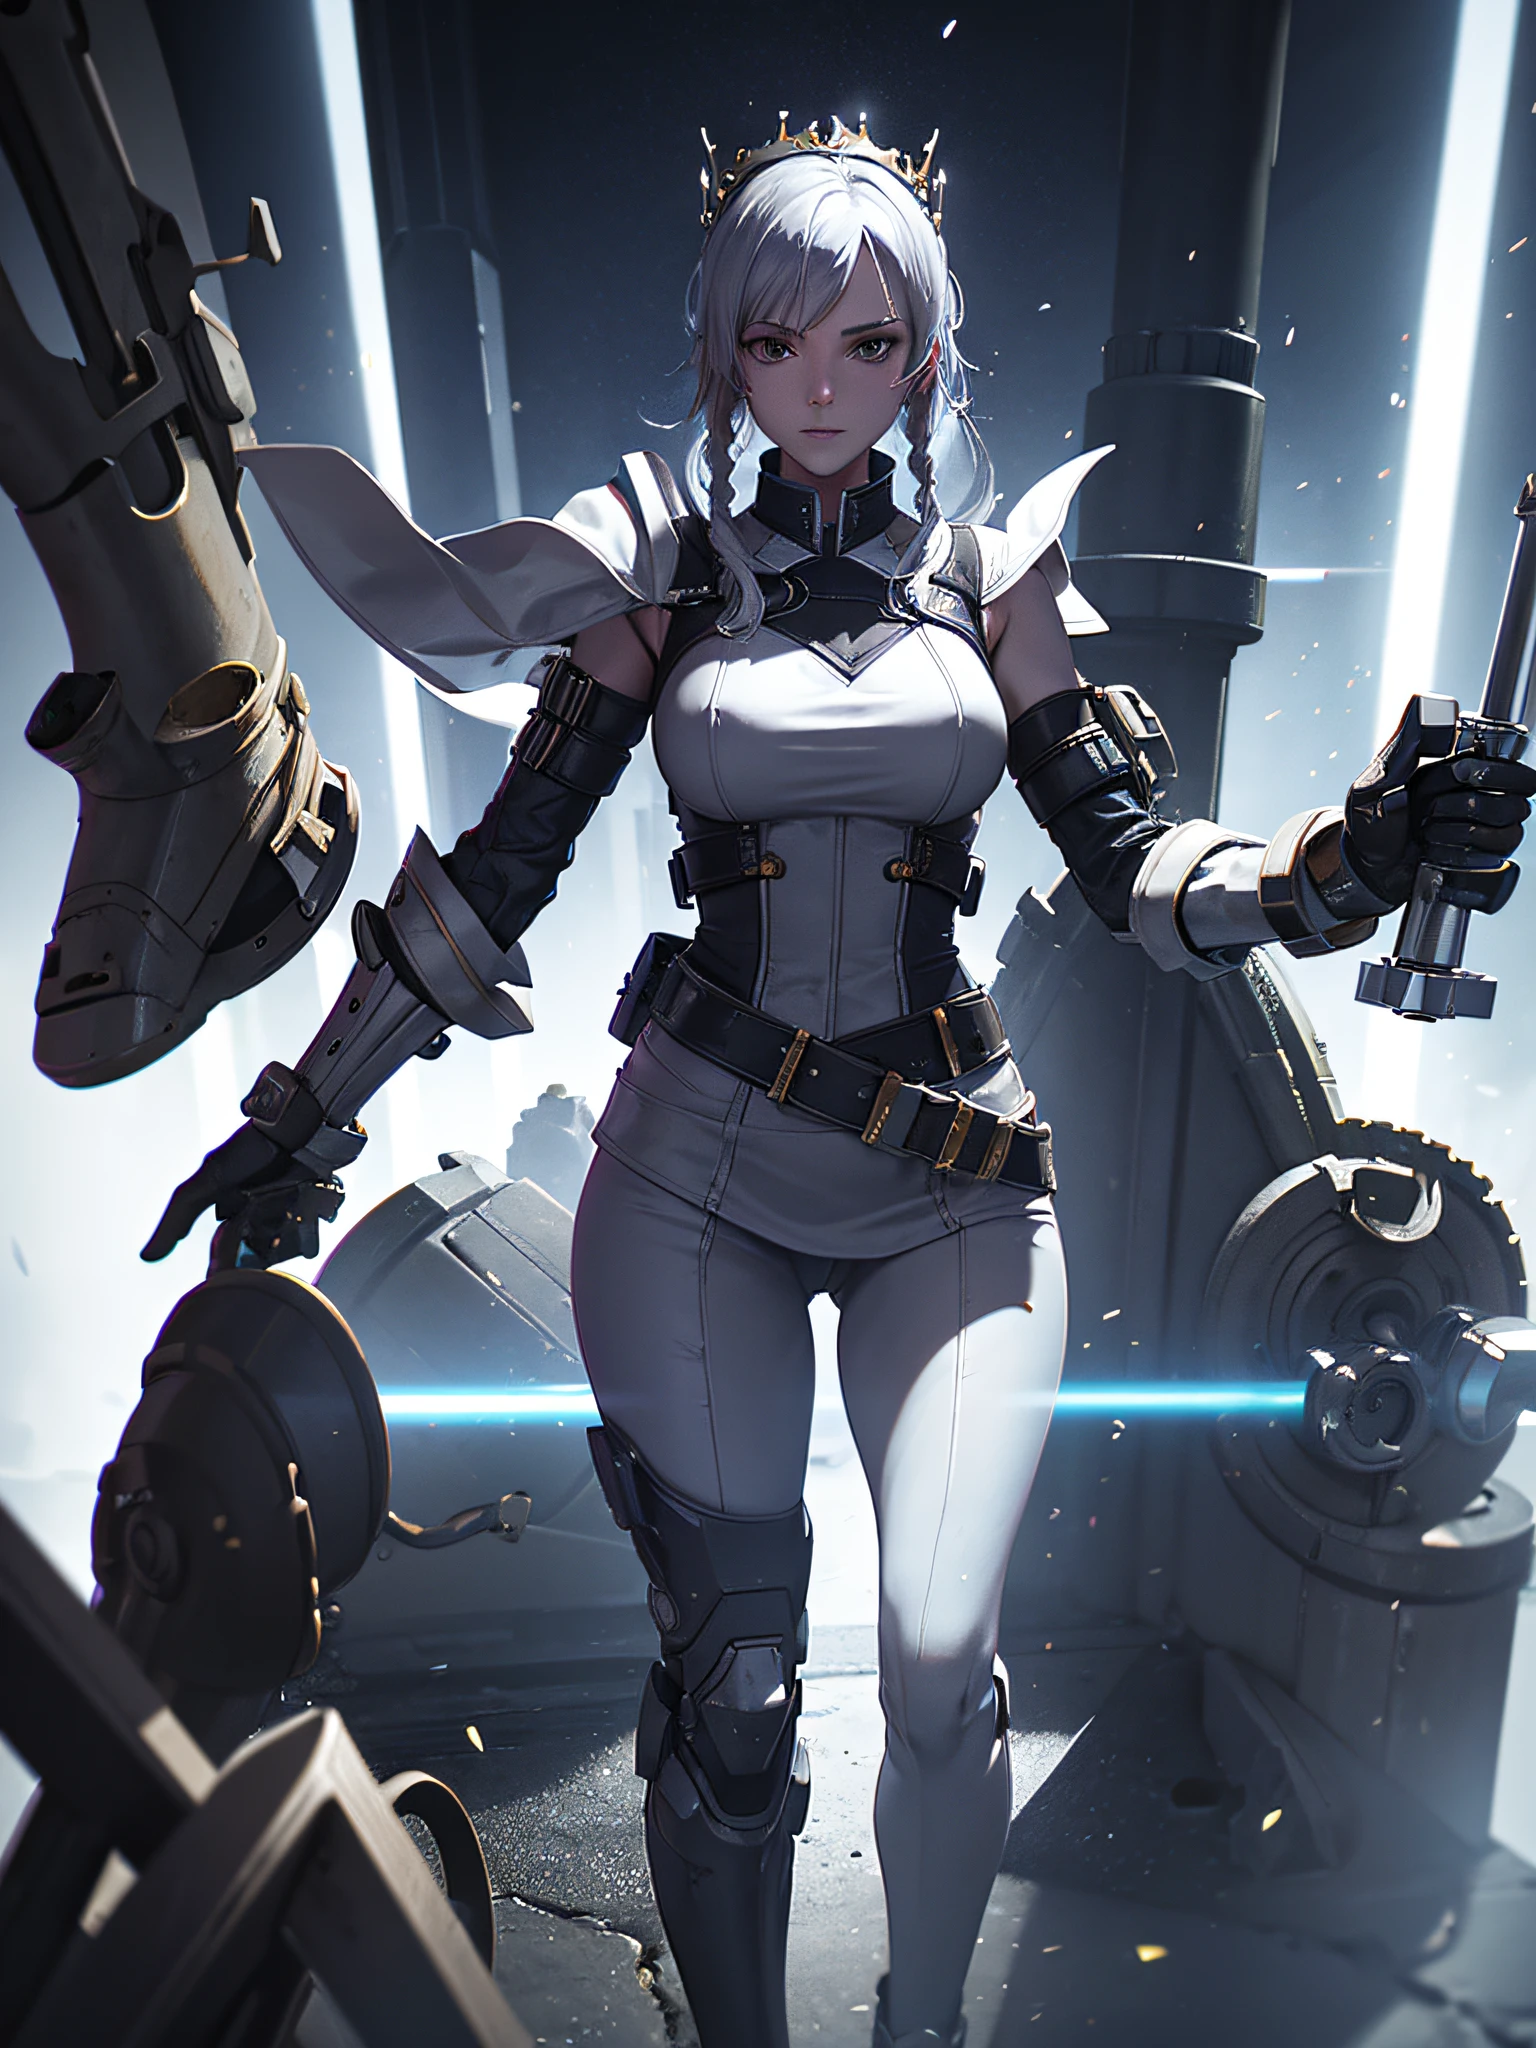 (Best Quality)), ((masutepiece)), (Very detailed: 1.3), 。.。.3D, master chef-mecha, Beautiful cyberpunk woman wearing crown, with master chef style armor, sci-fi technology, nffsw (High dynamic range), Ray tracing, NVIDIA RTX, Super Resolution, Unreal 5, Subsurface scattering, PBR Texture, Post-processing, Anisotropy Filtering, depth of fields, Maximum sharpness and sharpness, multi-layer texture, specular and albedo mapping, Surface Shading, Accurate simulation of light-material interactions, Perfect proportions, Octane Rendering, Duotone lighting, Low ISO, red balance, thirds rule, Wide aperture, 8K Raw, high efficiency sub-pixel, Subpixel Convolution, light Particle, light scattering, Tindall Effect, so sexy, Full body, Battle Pose, silver hair with braids,